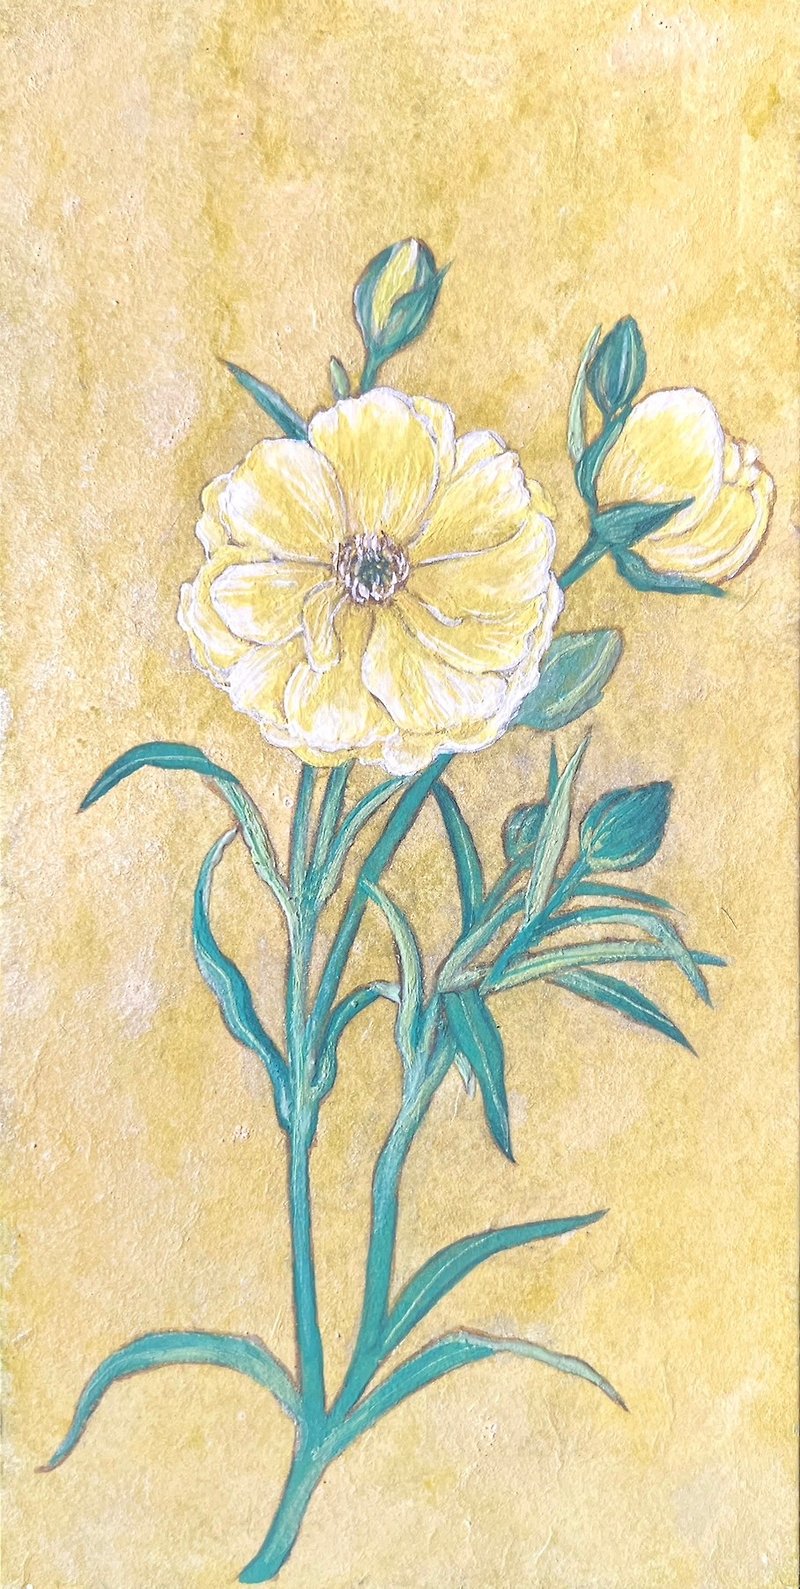 Mica and Flowers-Japanese Pigment Paste Painting - Illustration, Painting & Calligraphy - Other Materials 